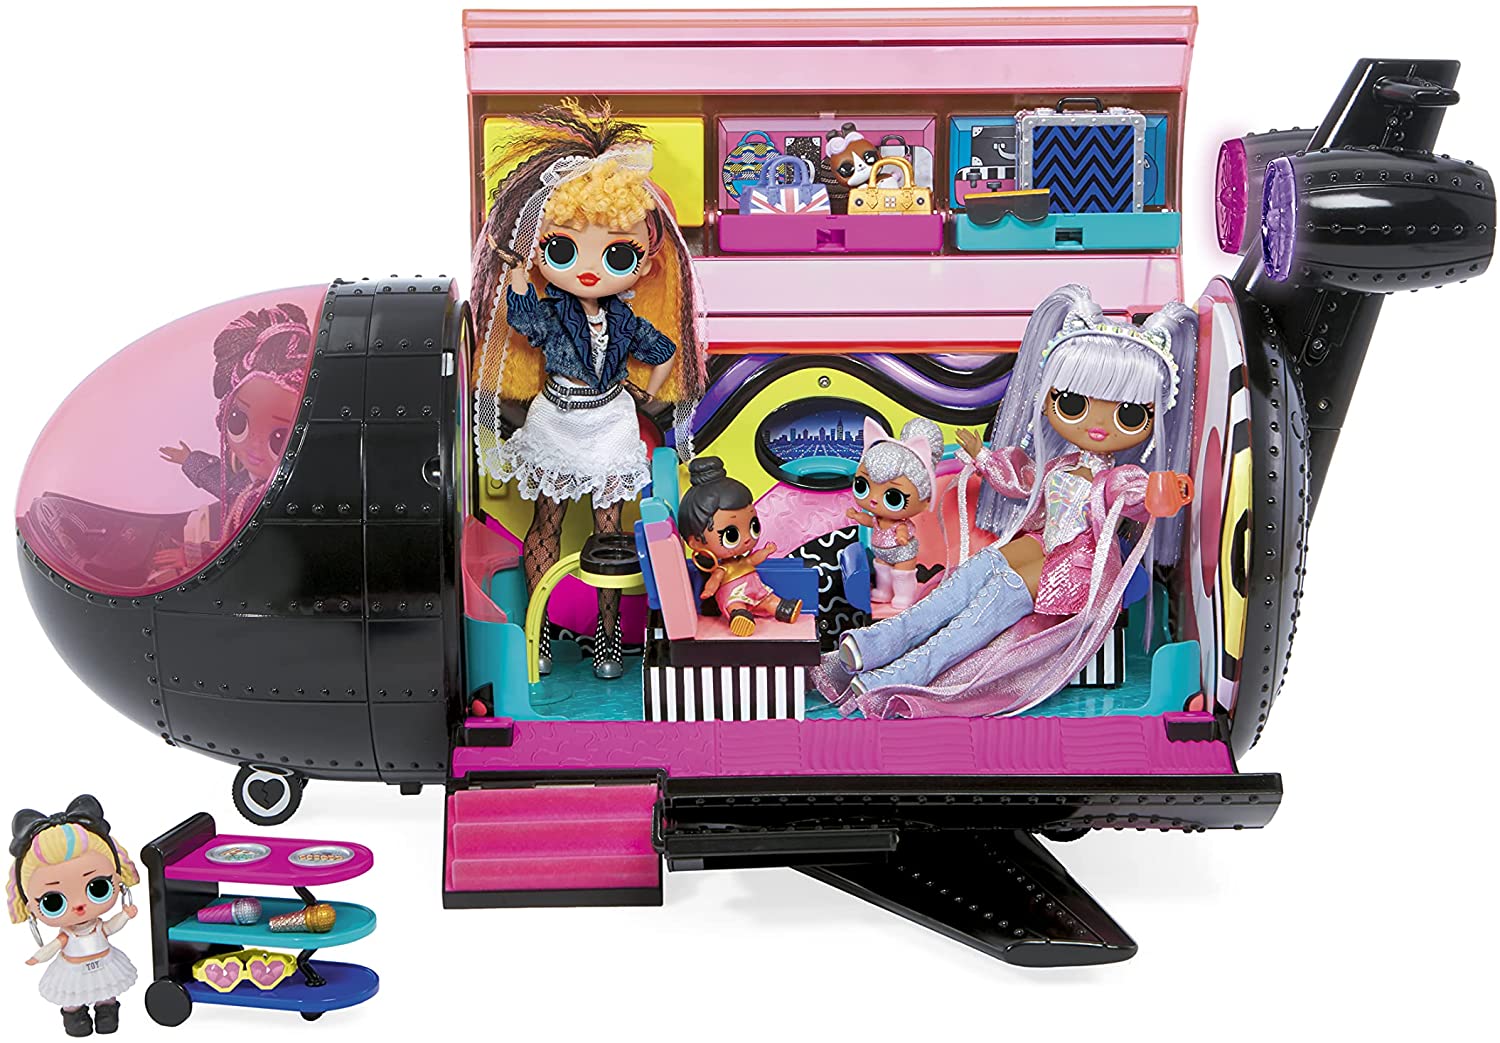 L.O.L. Surprise OMG Remix 4-in1 Exclusive Plan Playset w/ 50 Surprises $39.67 + Free Shipping